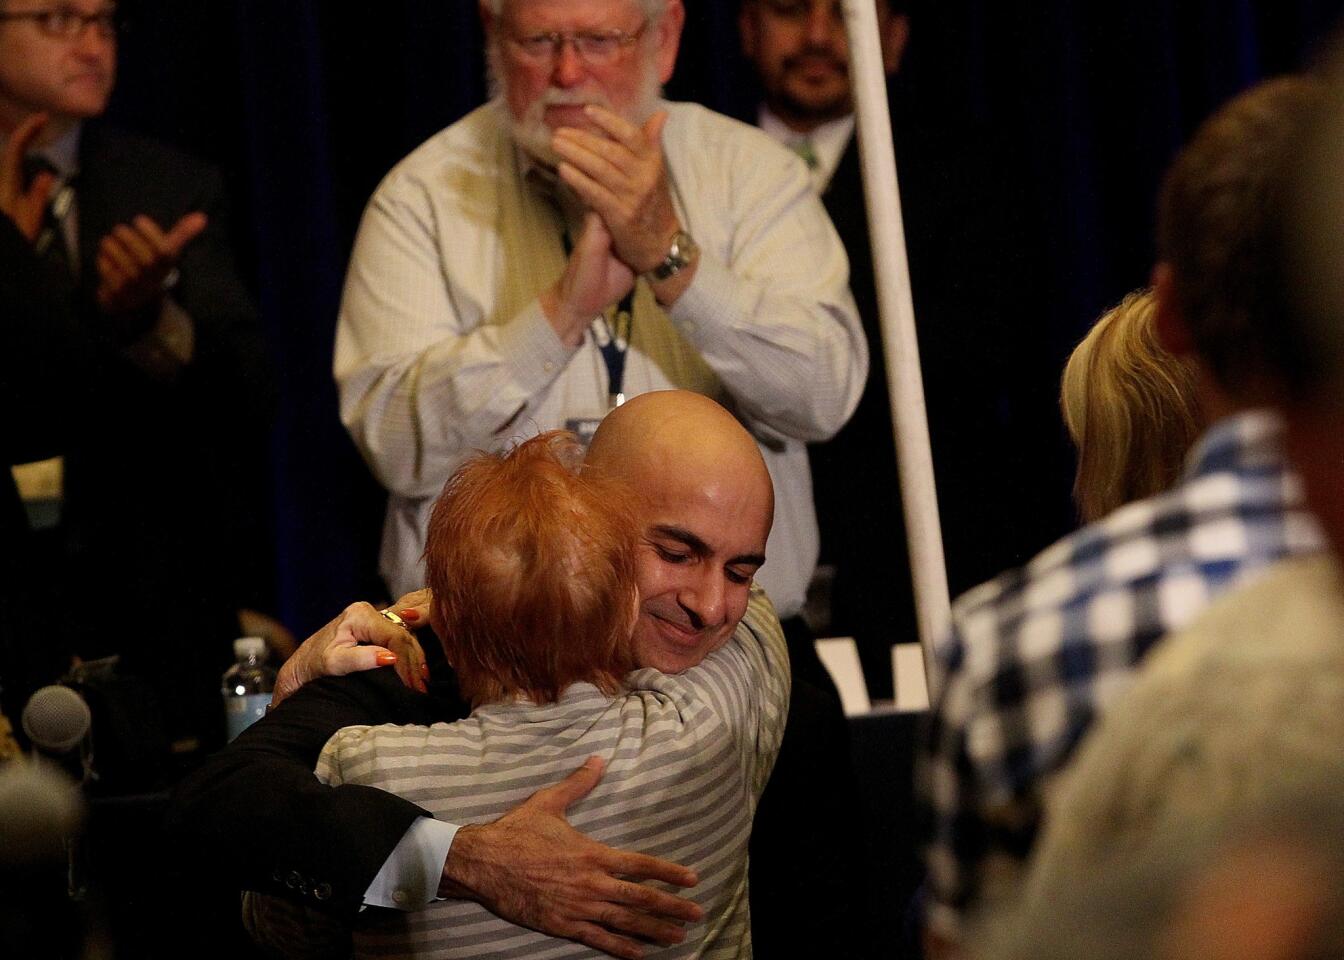 Republican gubernatorial candidate Neel Kashkari is greeted by a supporter after delivering a speech to delegates at the California Republican Convention at the LAX Marriott on Sept. 21.